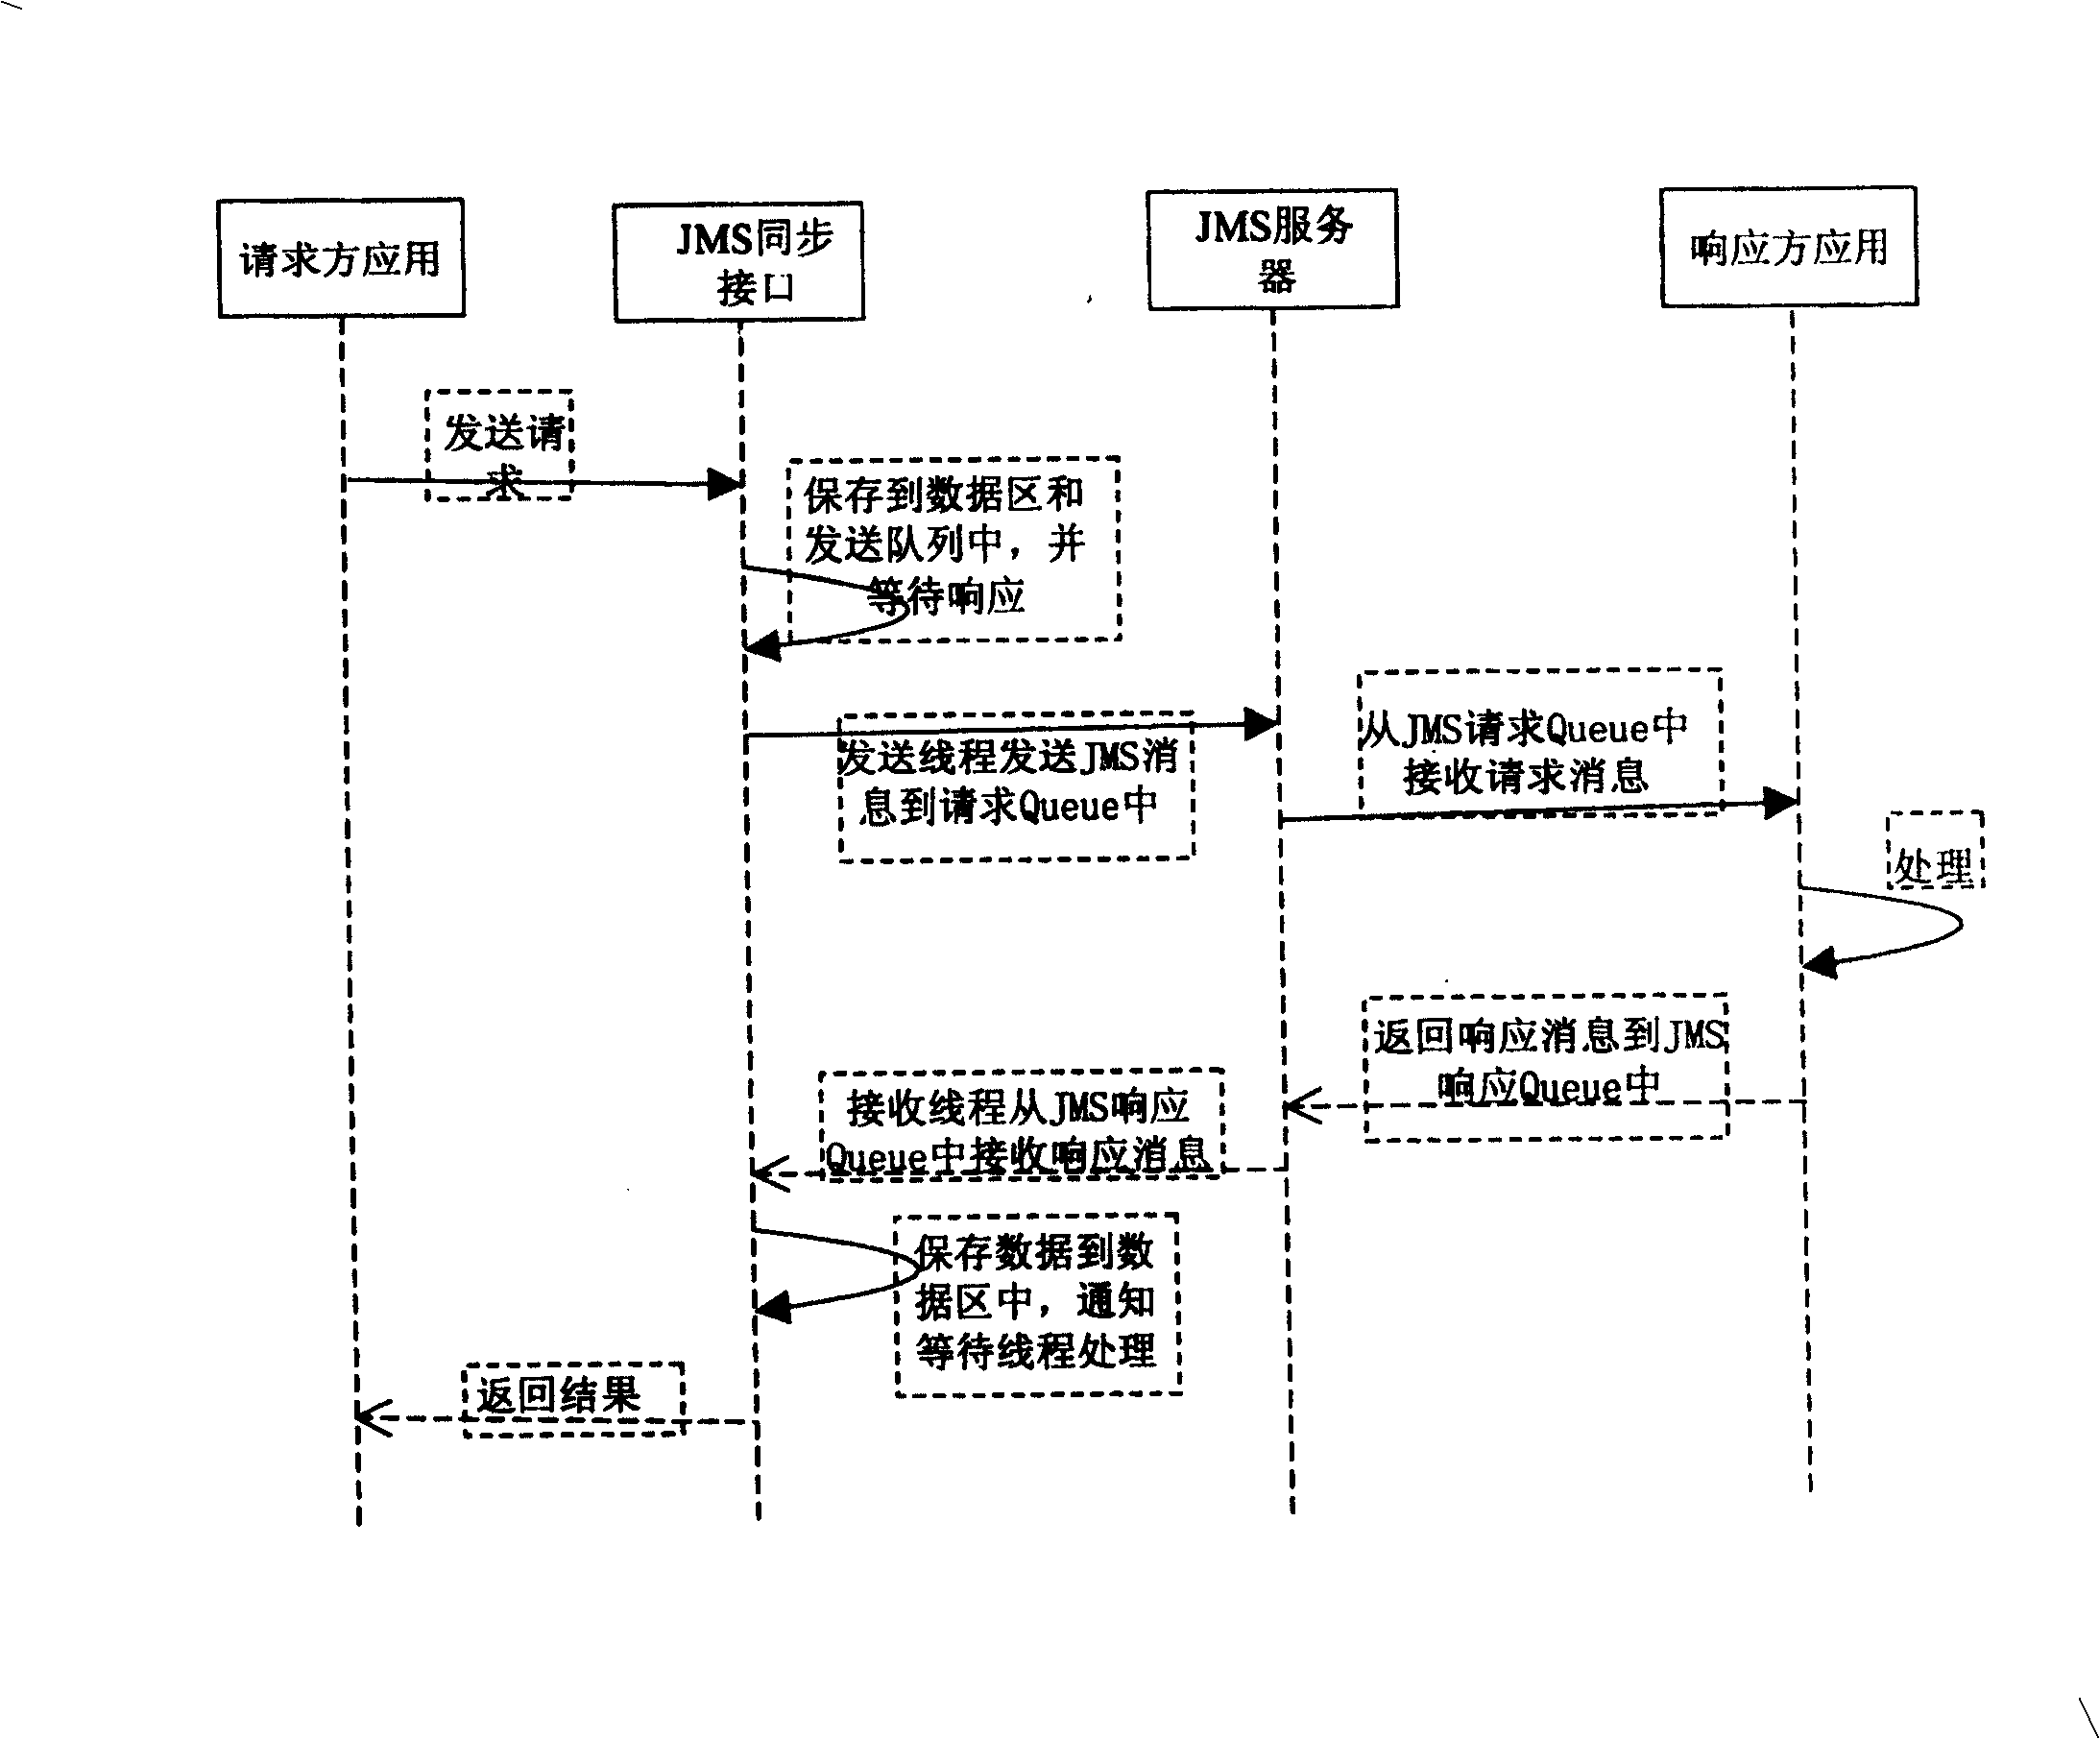 Synchronous information interface realizing method based on JAVA information service